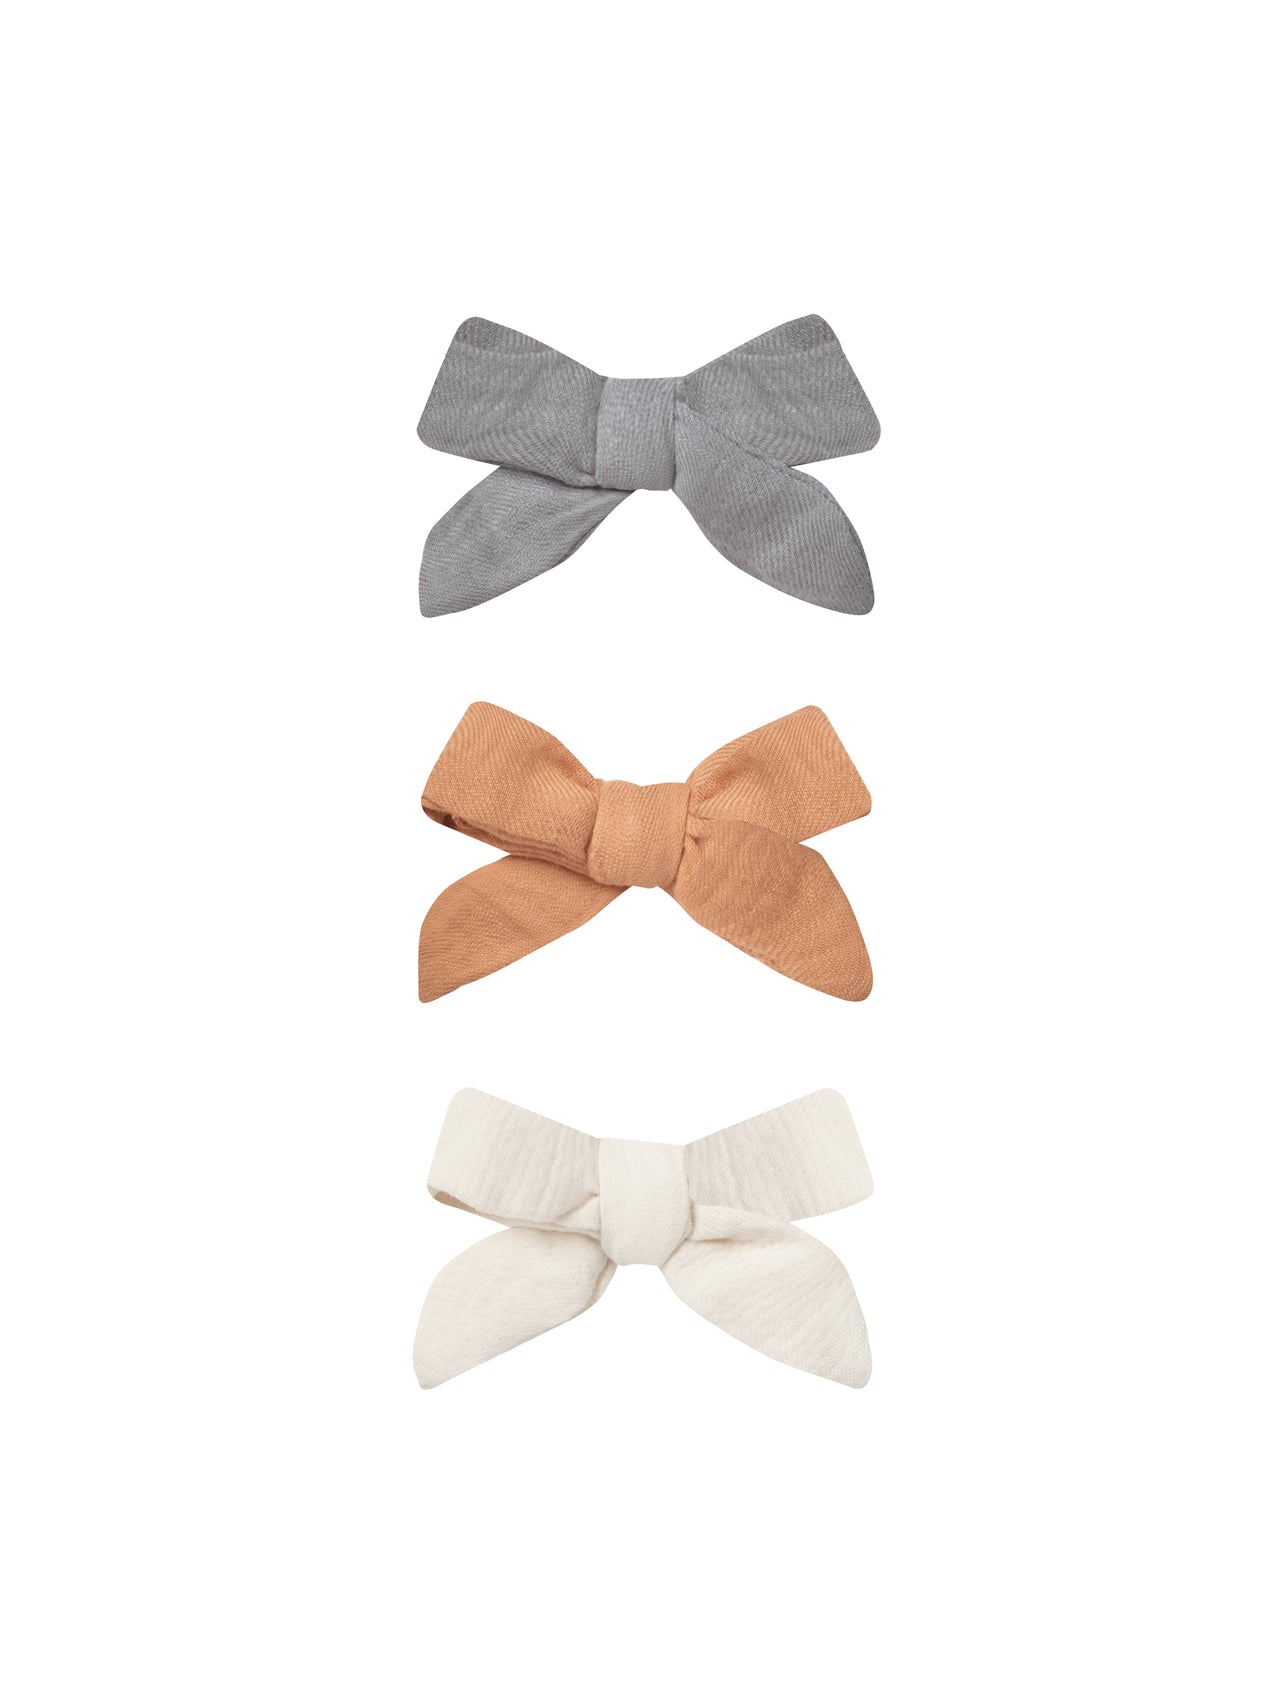 Quincy Mae Bow + Clip | Set of 3 (Lagoon, Melon, Ivory)